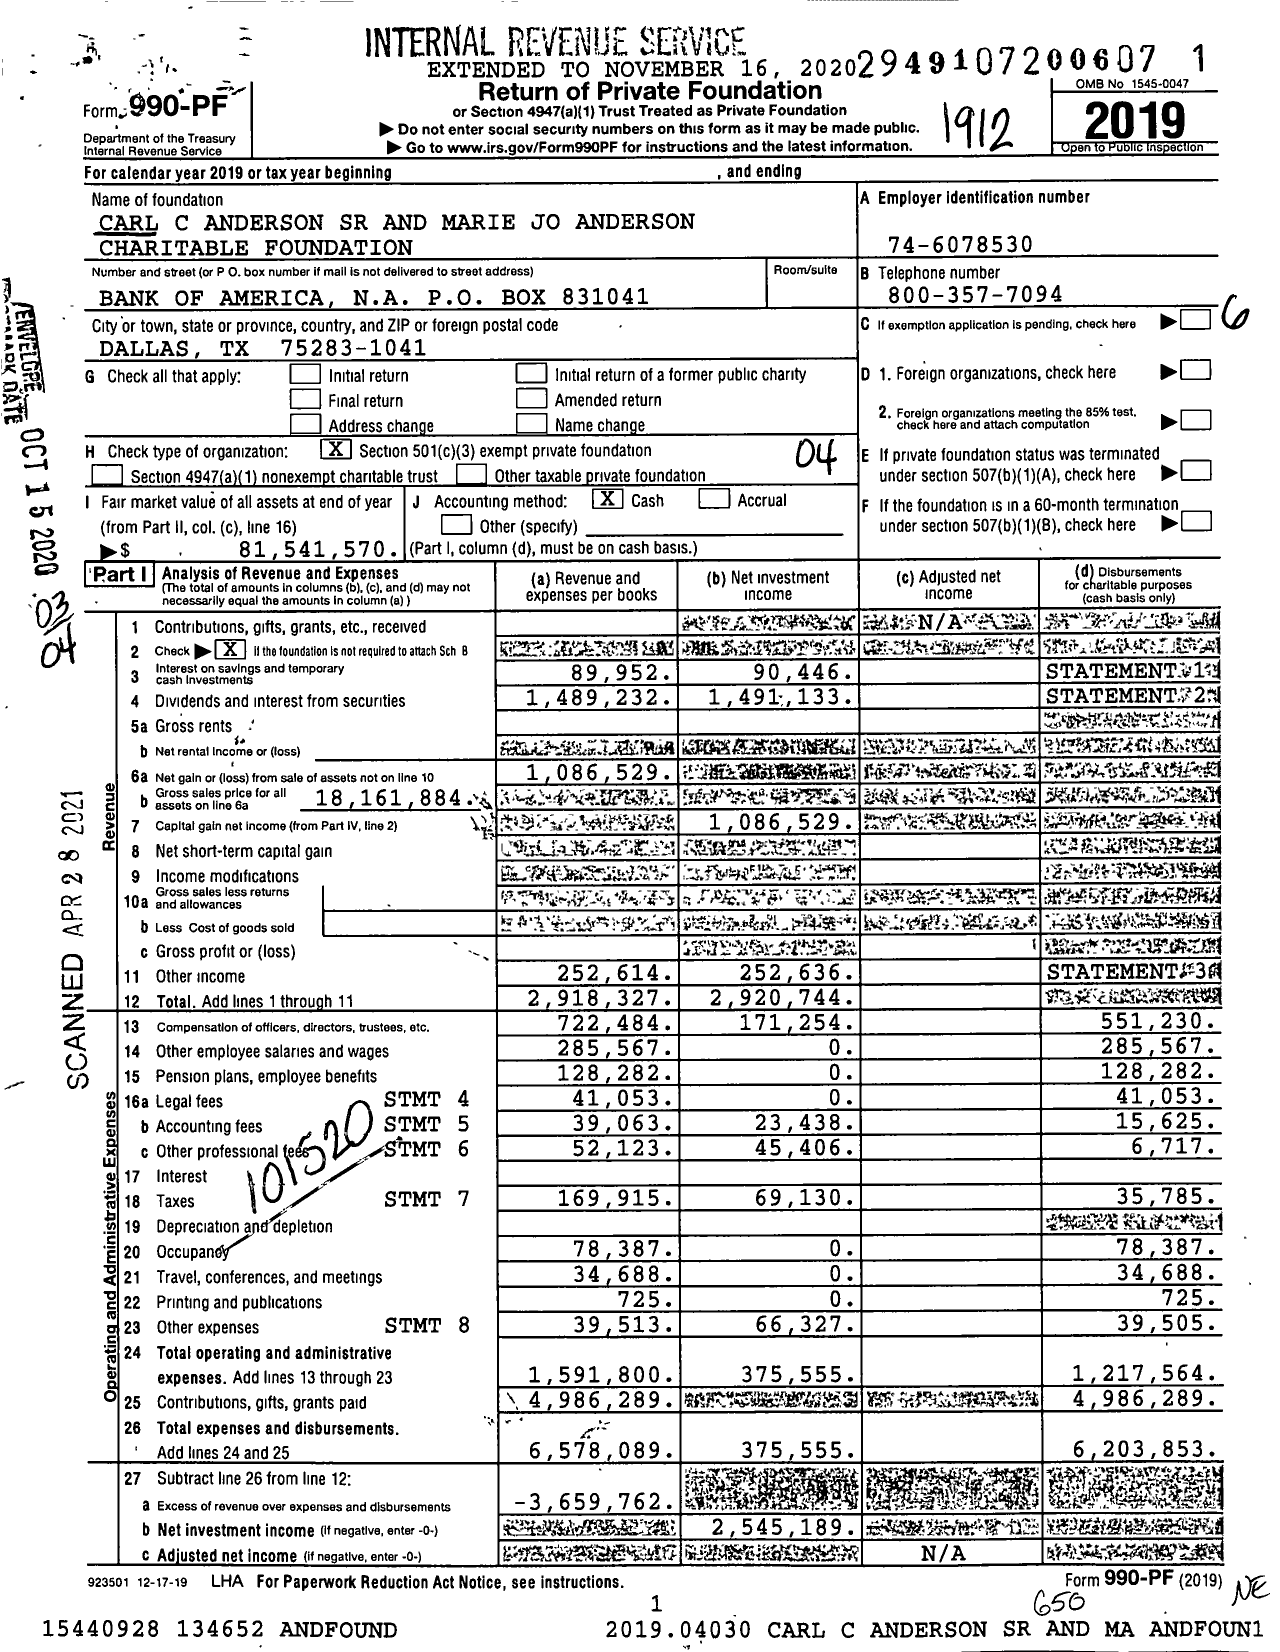 Image of first page of 2019 Form 990PF for Carl C Anderson SR and Marie Jo Anderson Charitable Foundation